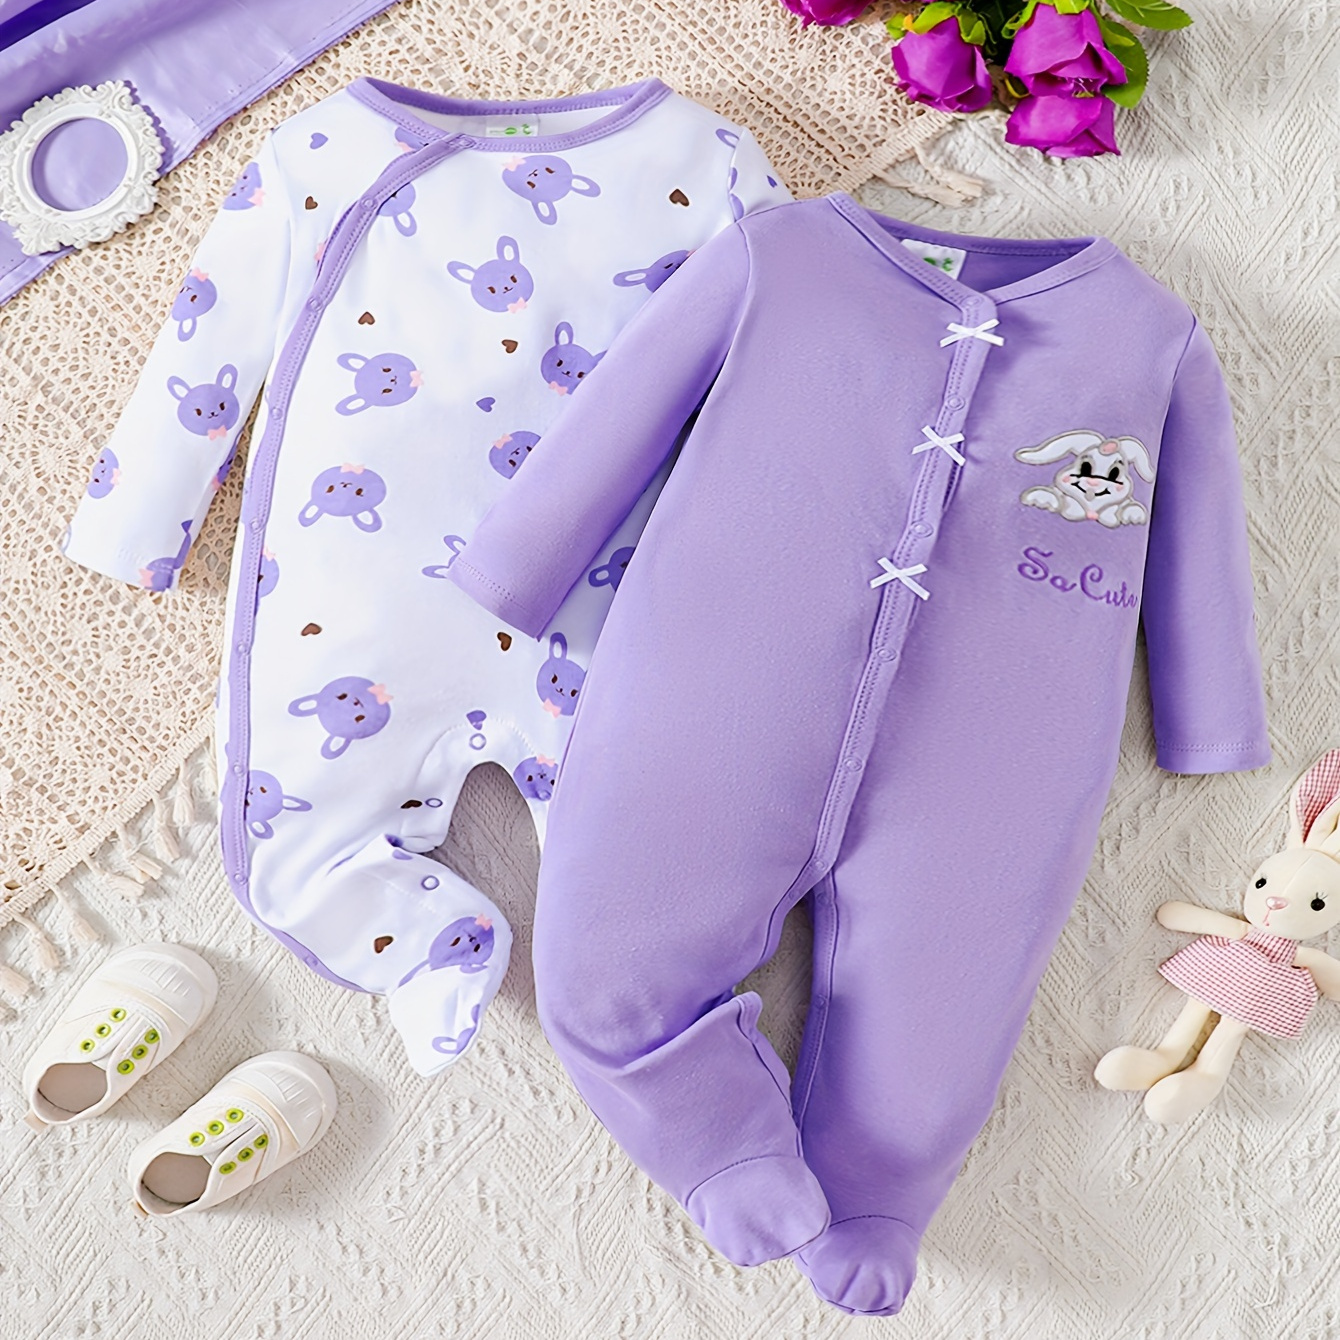 

Baby Cute Bunny Graphic & Comfy Cotton Jumpsuits 2pcs/set For Boys And Girls, Footed Onesies, Toddler's Cute Bodysuit Set